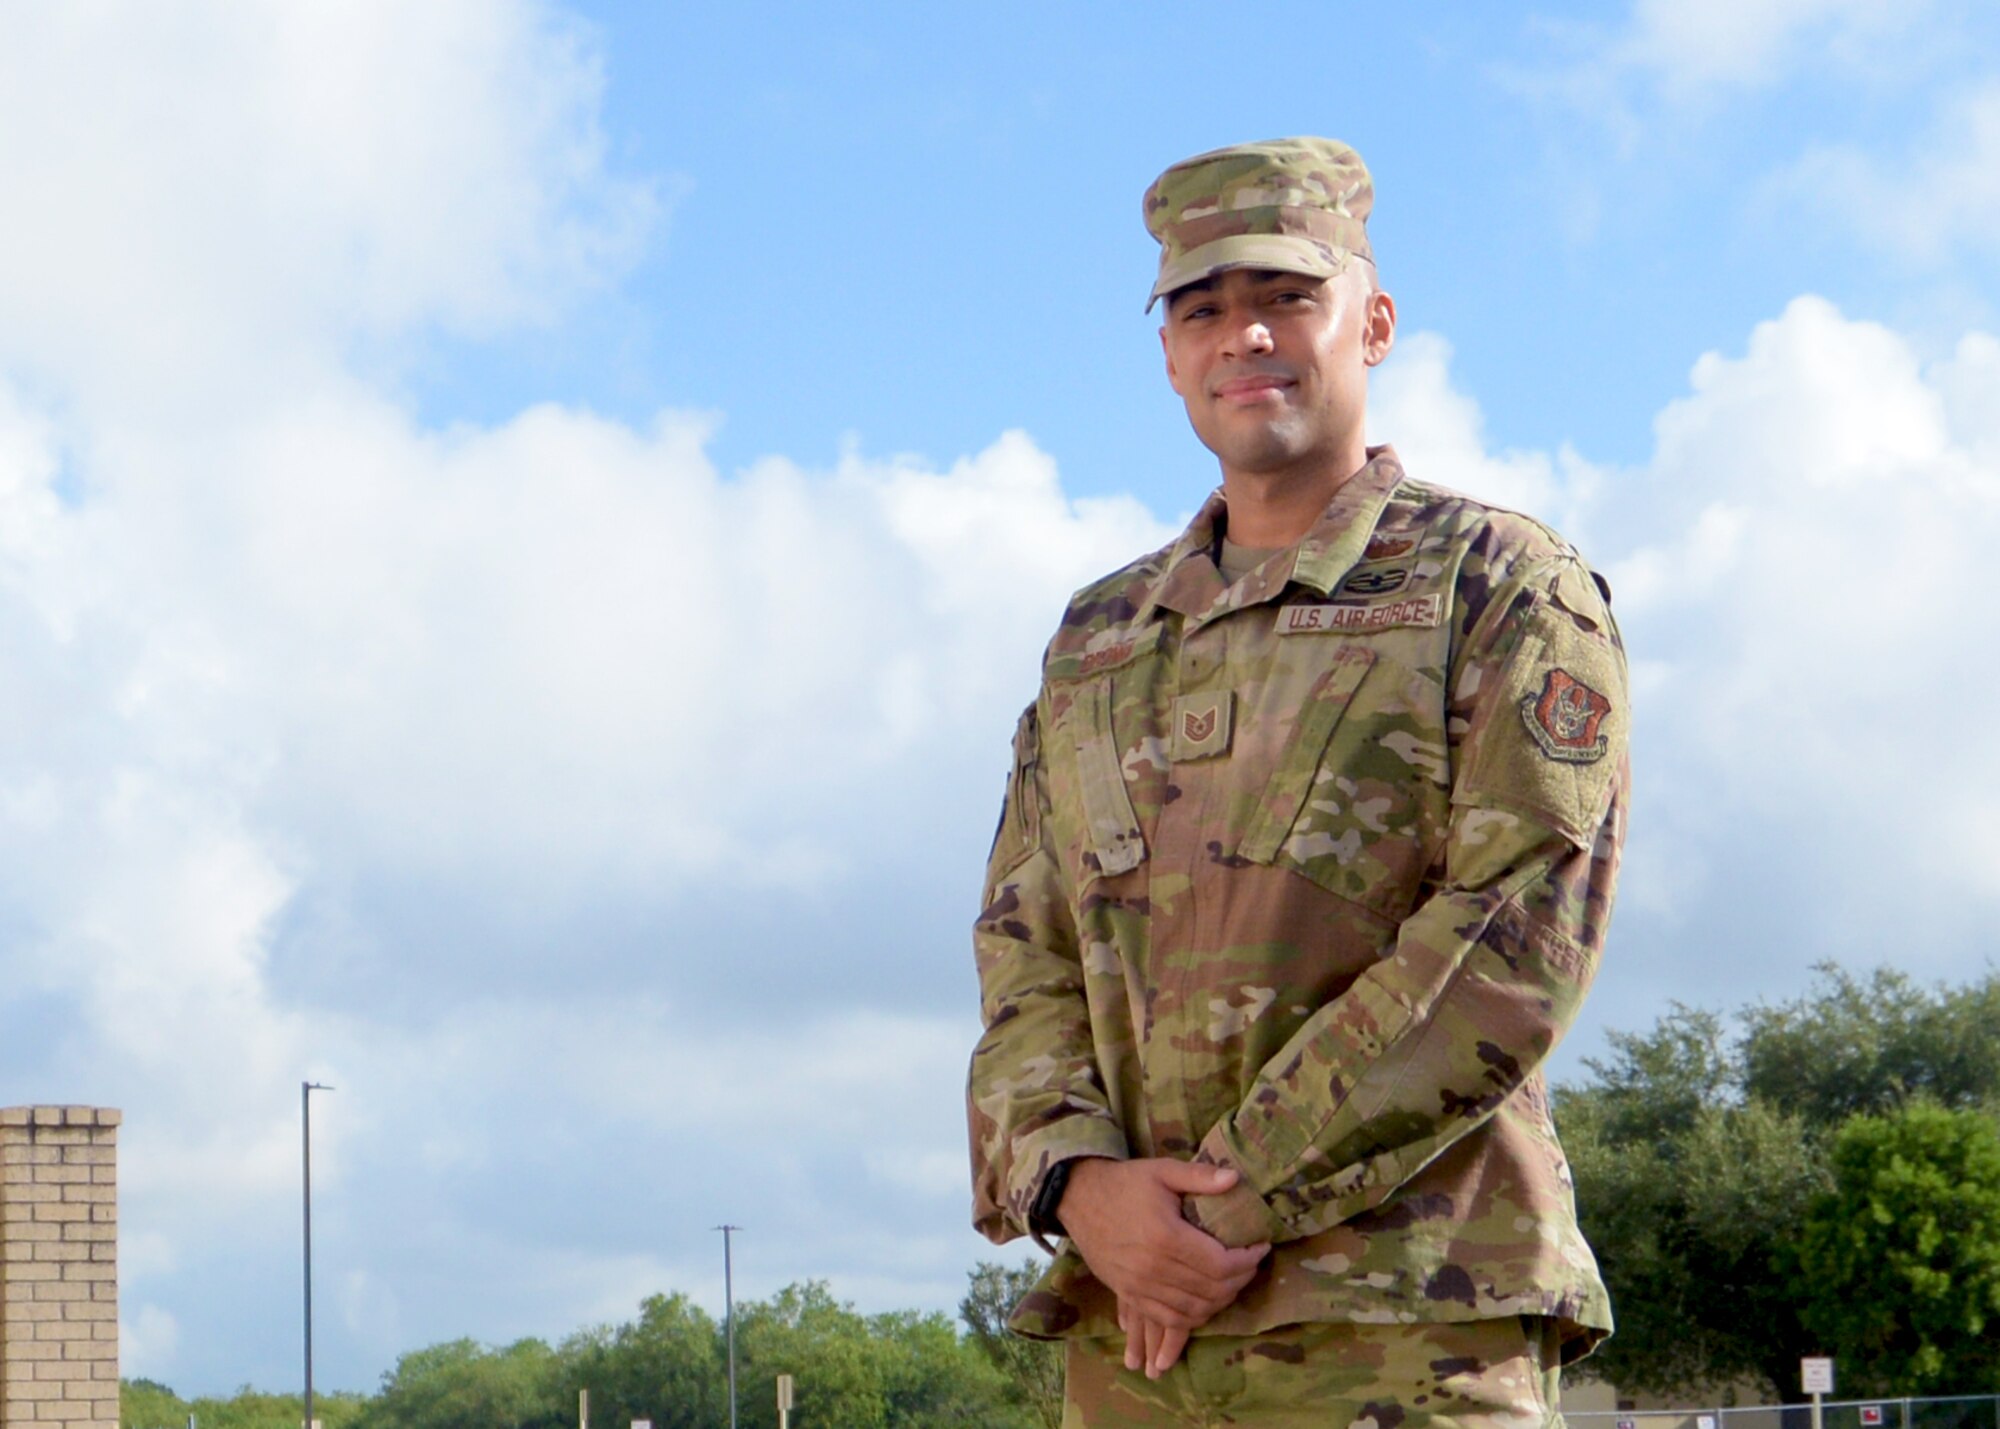 Tech. Sgt. Samuel Brown, 960th Cyberspace Operations Group client systems technician, stands for a photo outside the 960th Cyberspace Wing headquarters building Aug. 8, 2020, at Joint Base San Antonio-Chapman Training Annex, Texas. (U.S. Air Force photo by Samantha Mathison)